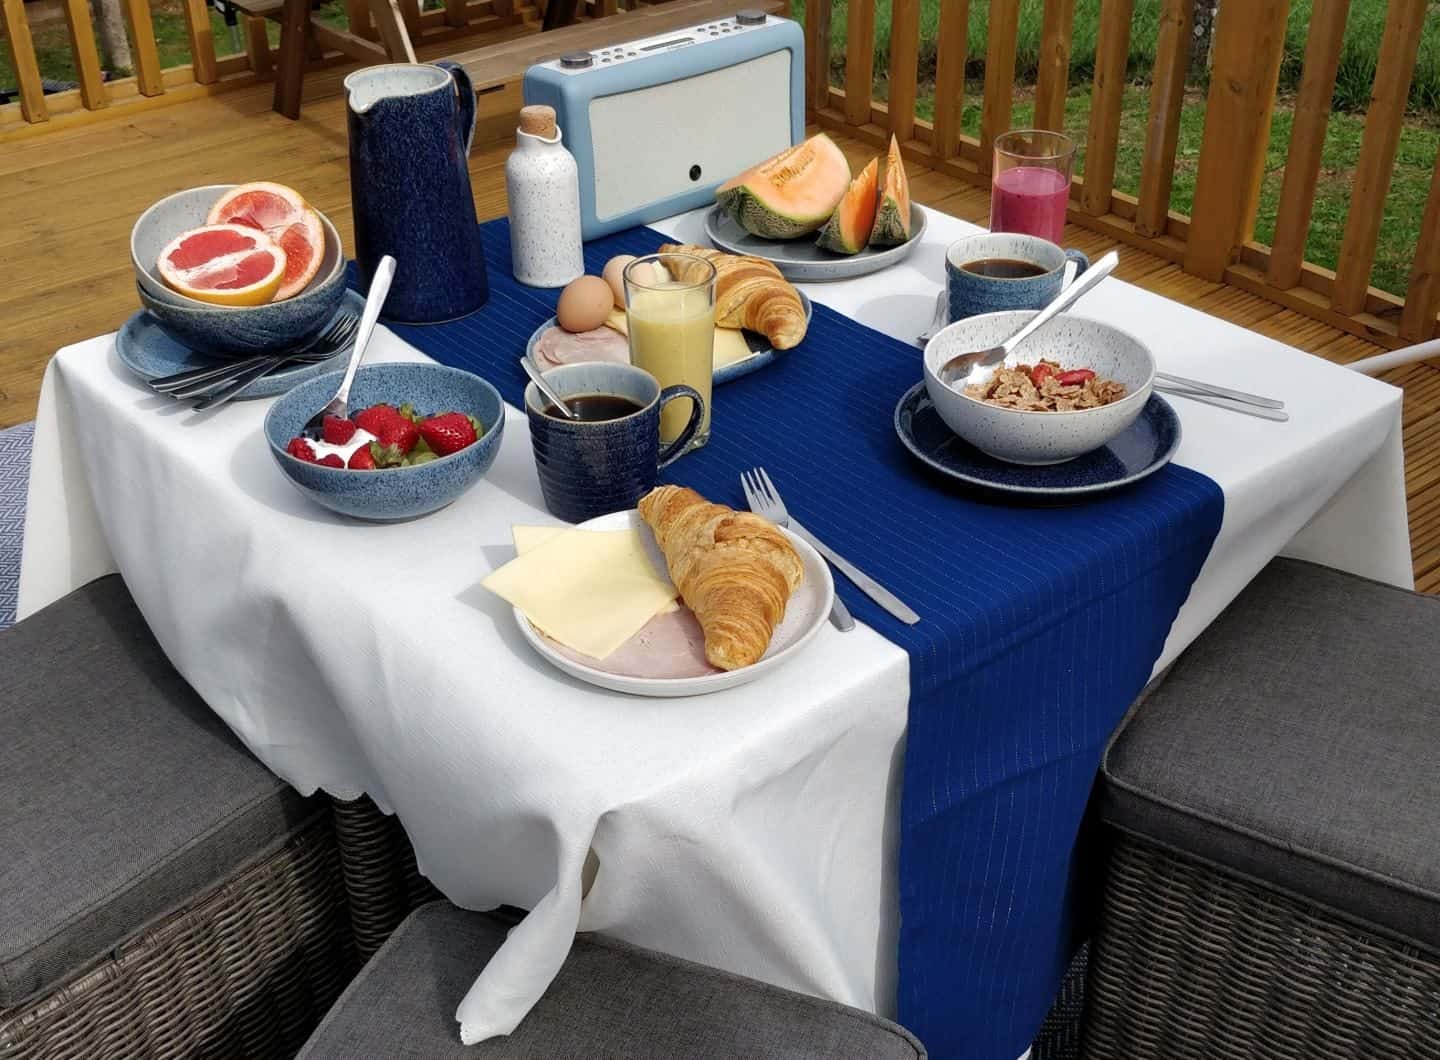 Al fresco activities eating breakfast outside with the Denby Studio Blue Casual Dining Collection